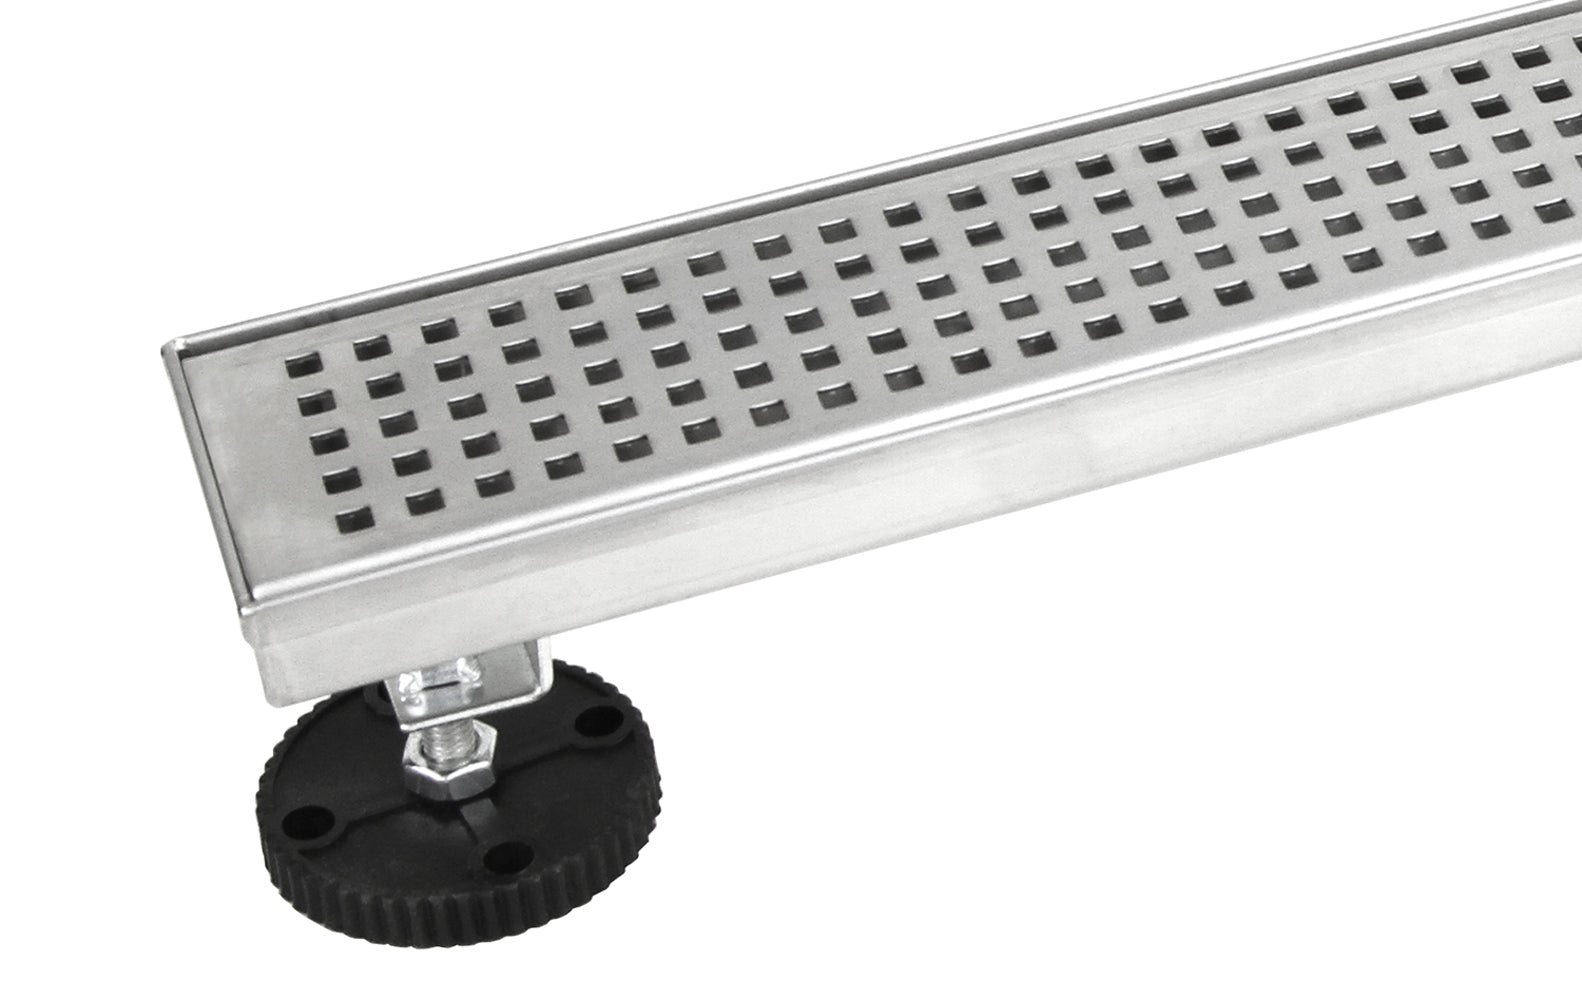 Bathroom Shower Linear Drain Square Checker Pattern Grate Brushed 304 Stainless Steel with Threaded Adaptor and Adjustable Leveling Feet